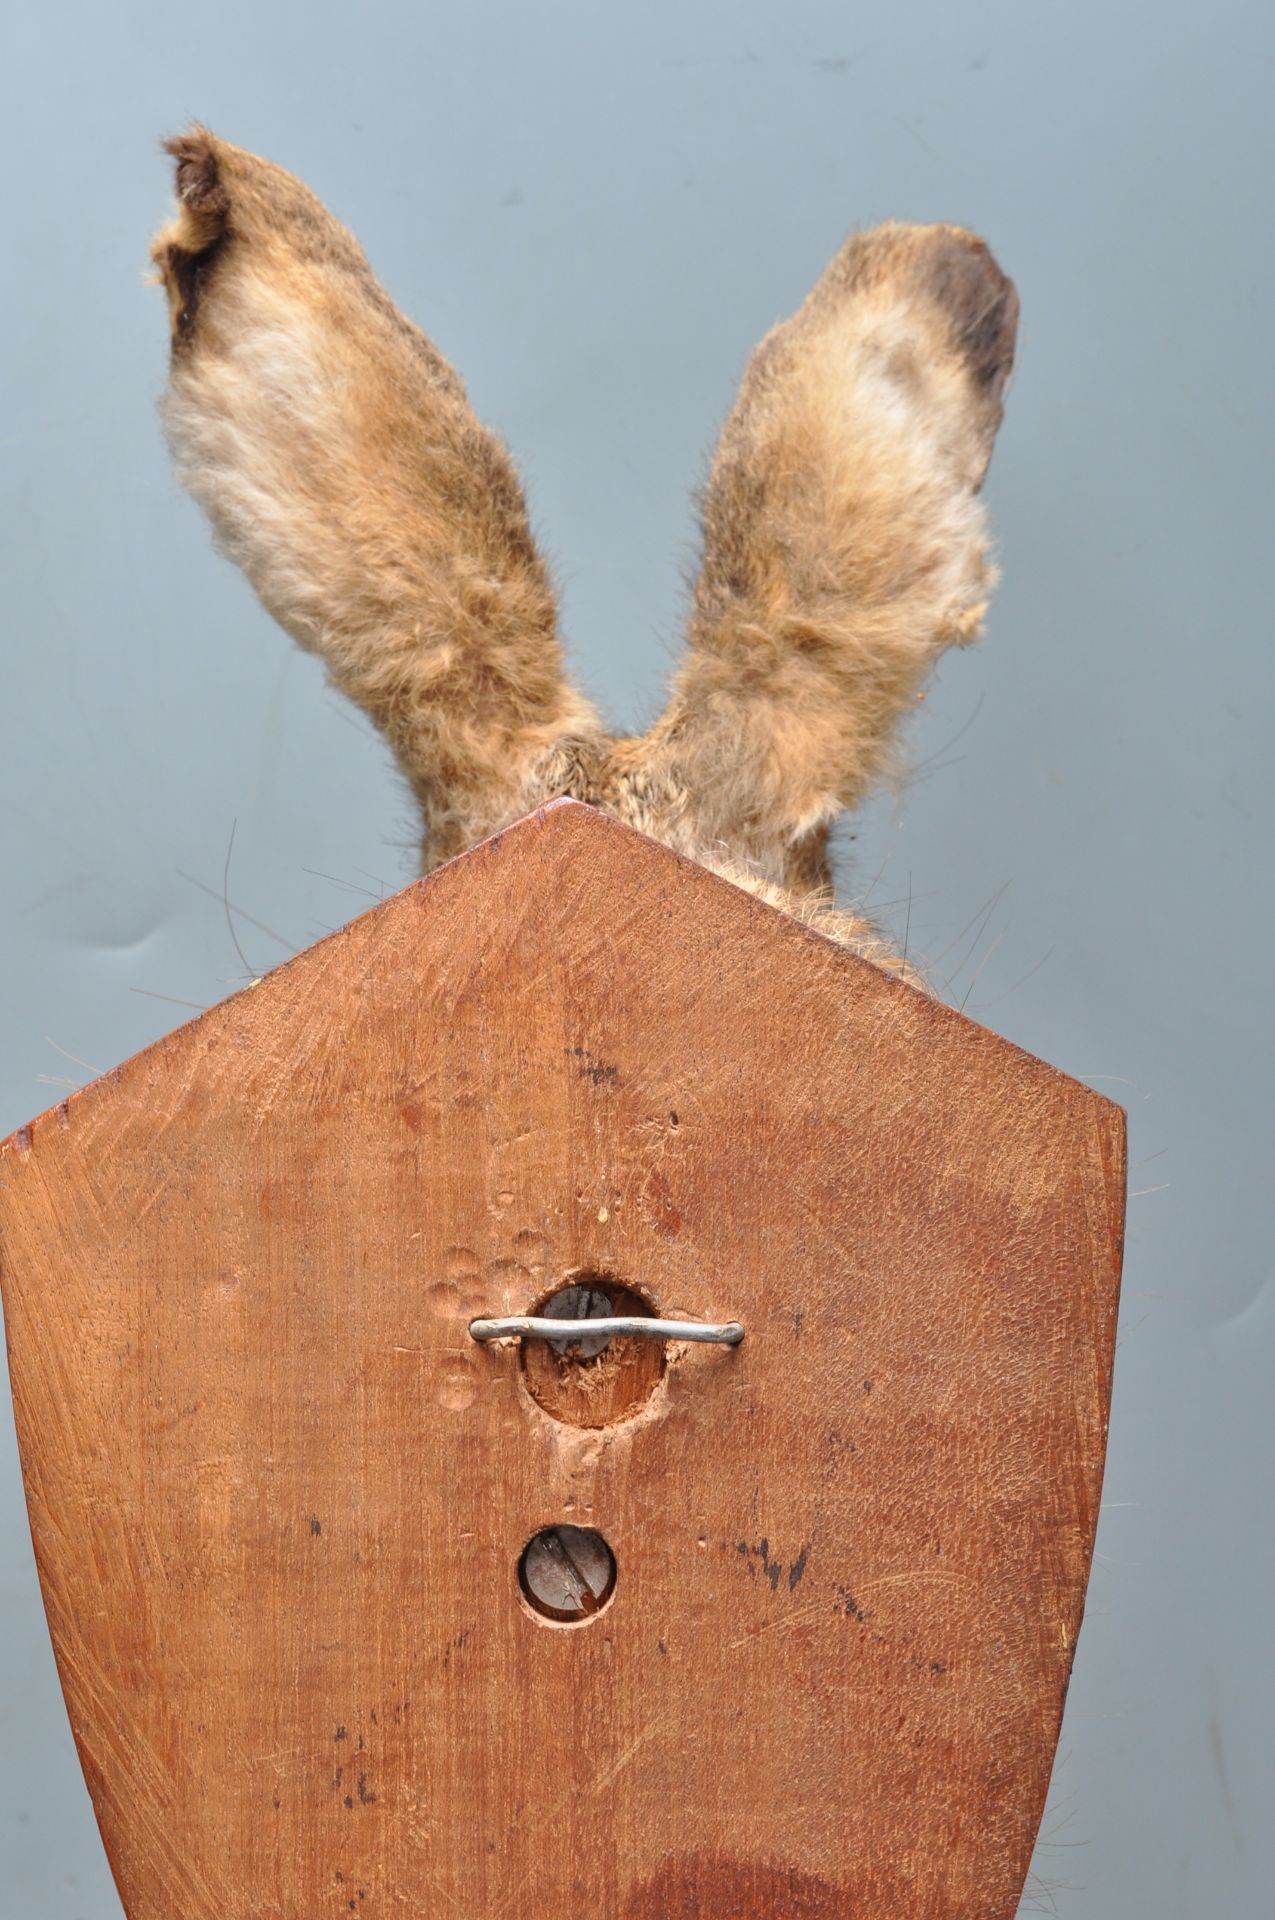 OF TAXIDERMY INTEREST - WALL MOUNTED HARES HEAD - Bild 7 aus 7